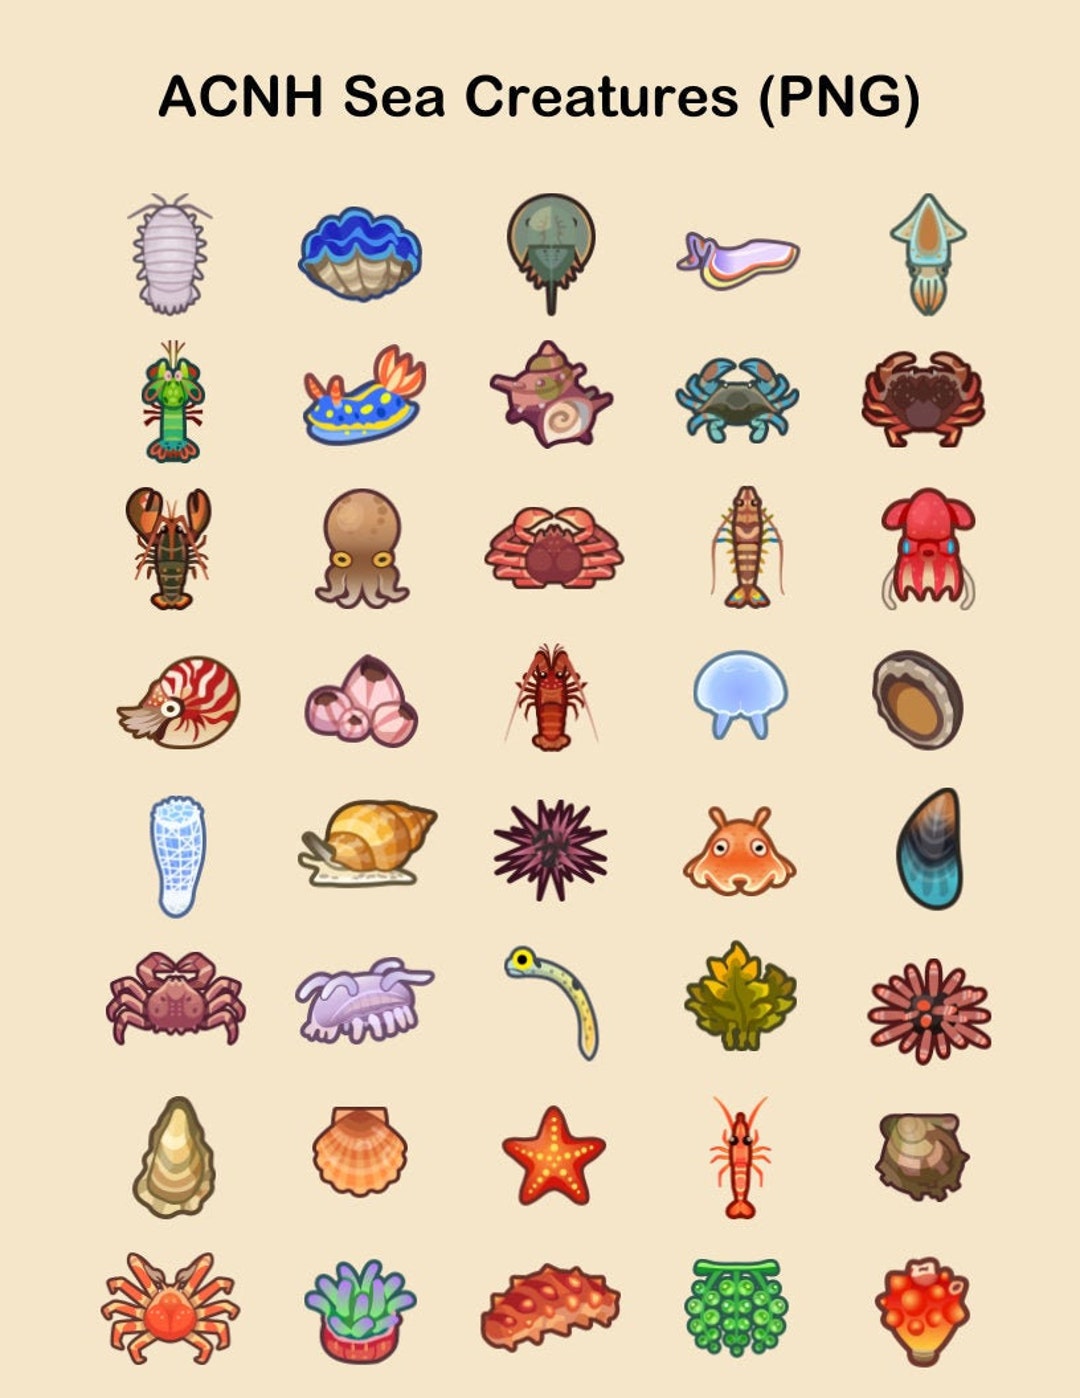 Animal Crossing Sea Creatures PNG, JPG, Clipart, Icon, Items, Art High  Quality Digital Download 